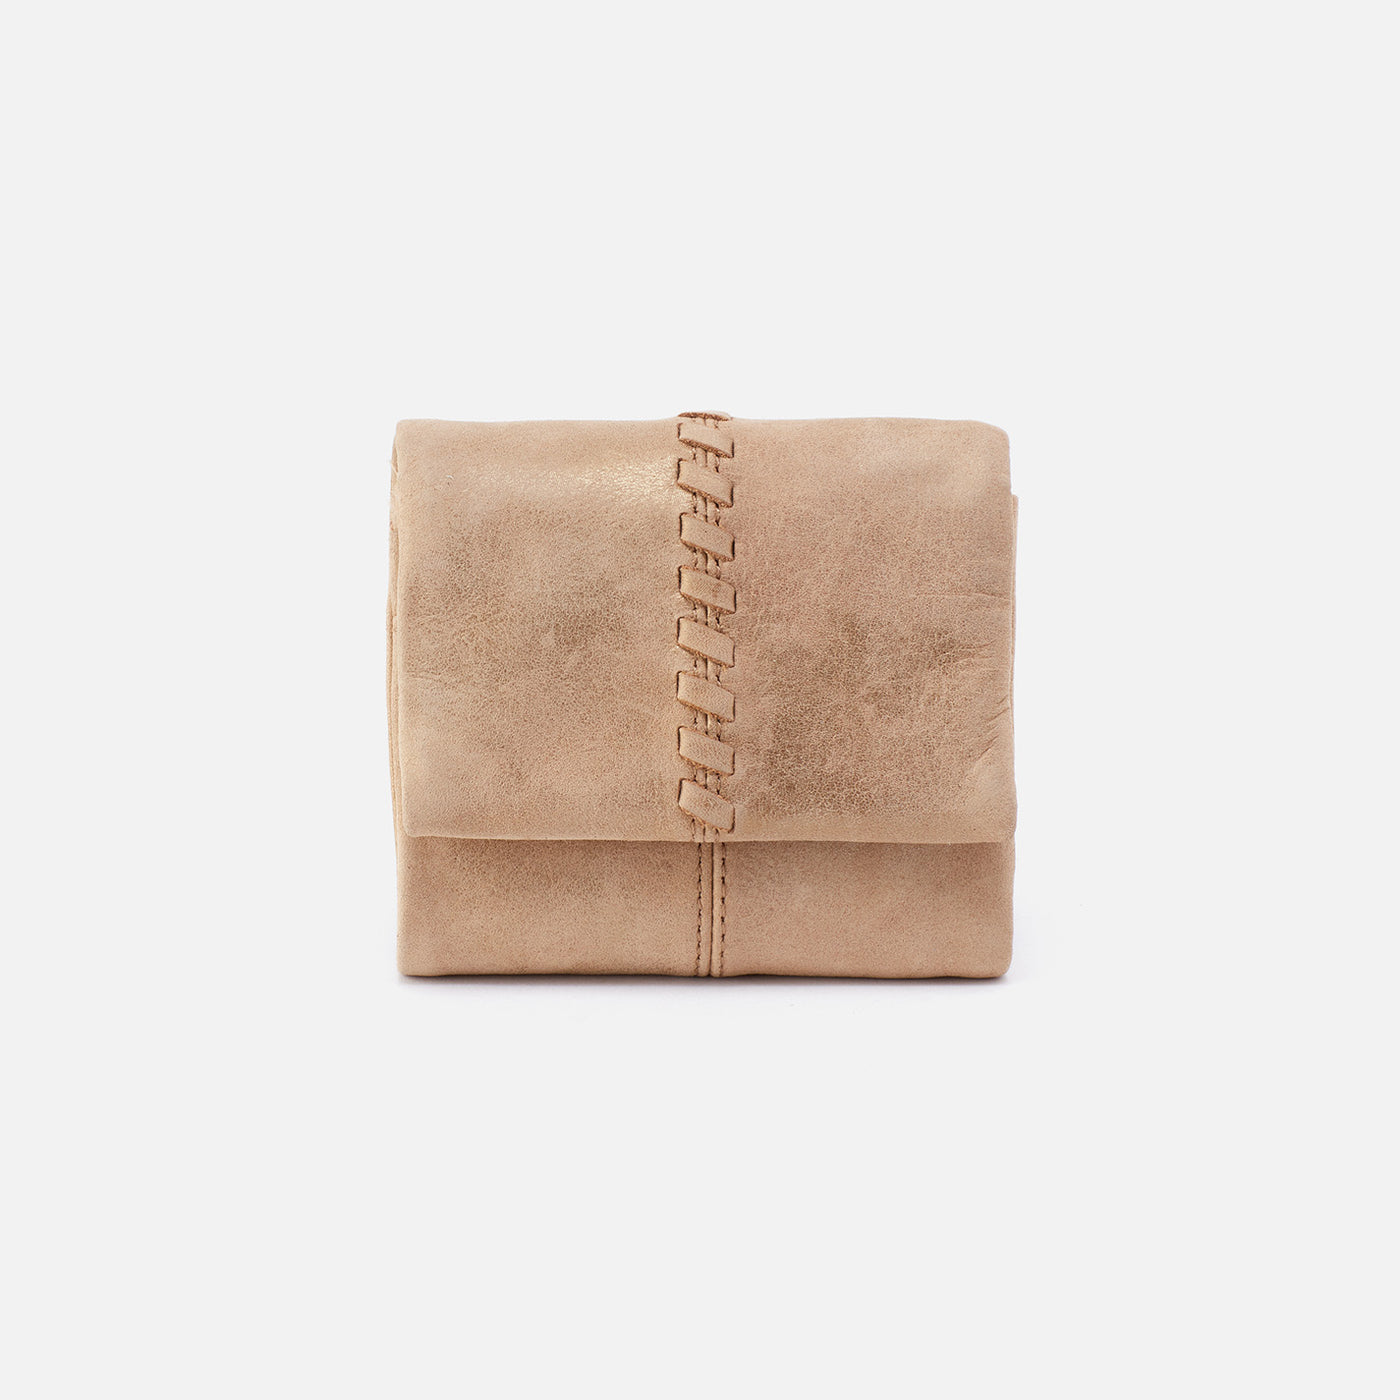 Keen Mini Trifold Compact Wallet in Nubuck Leather - Gold Cashmere